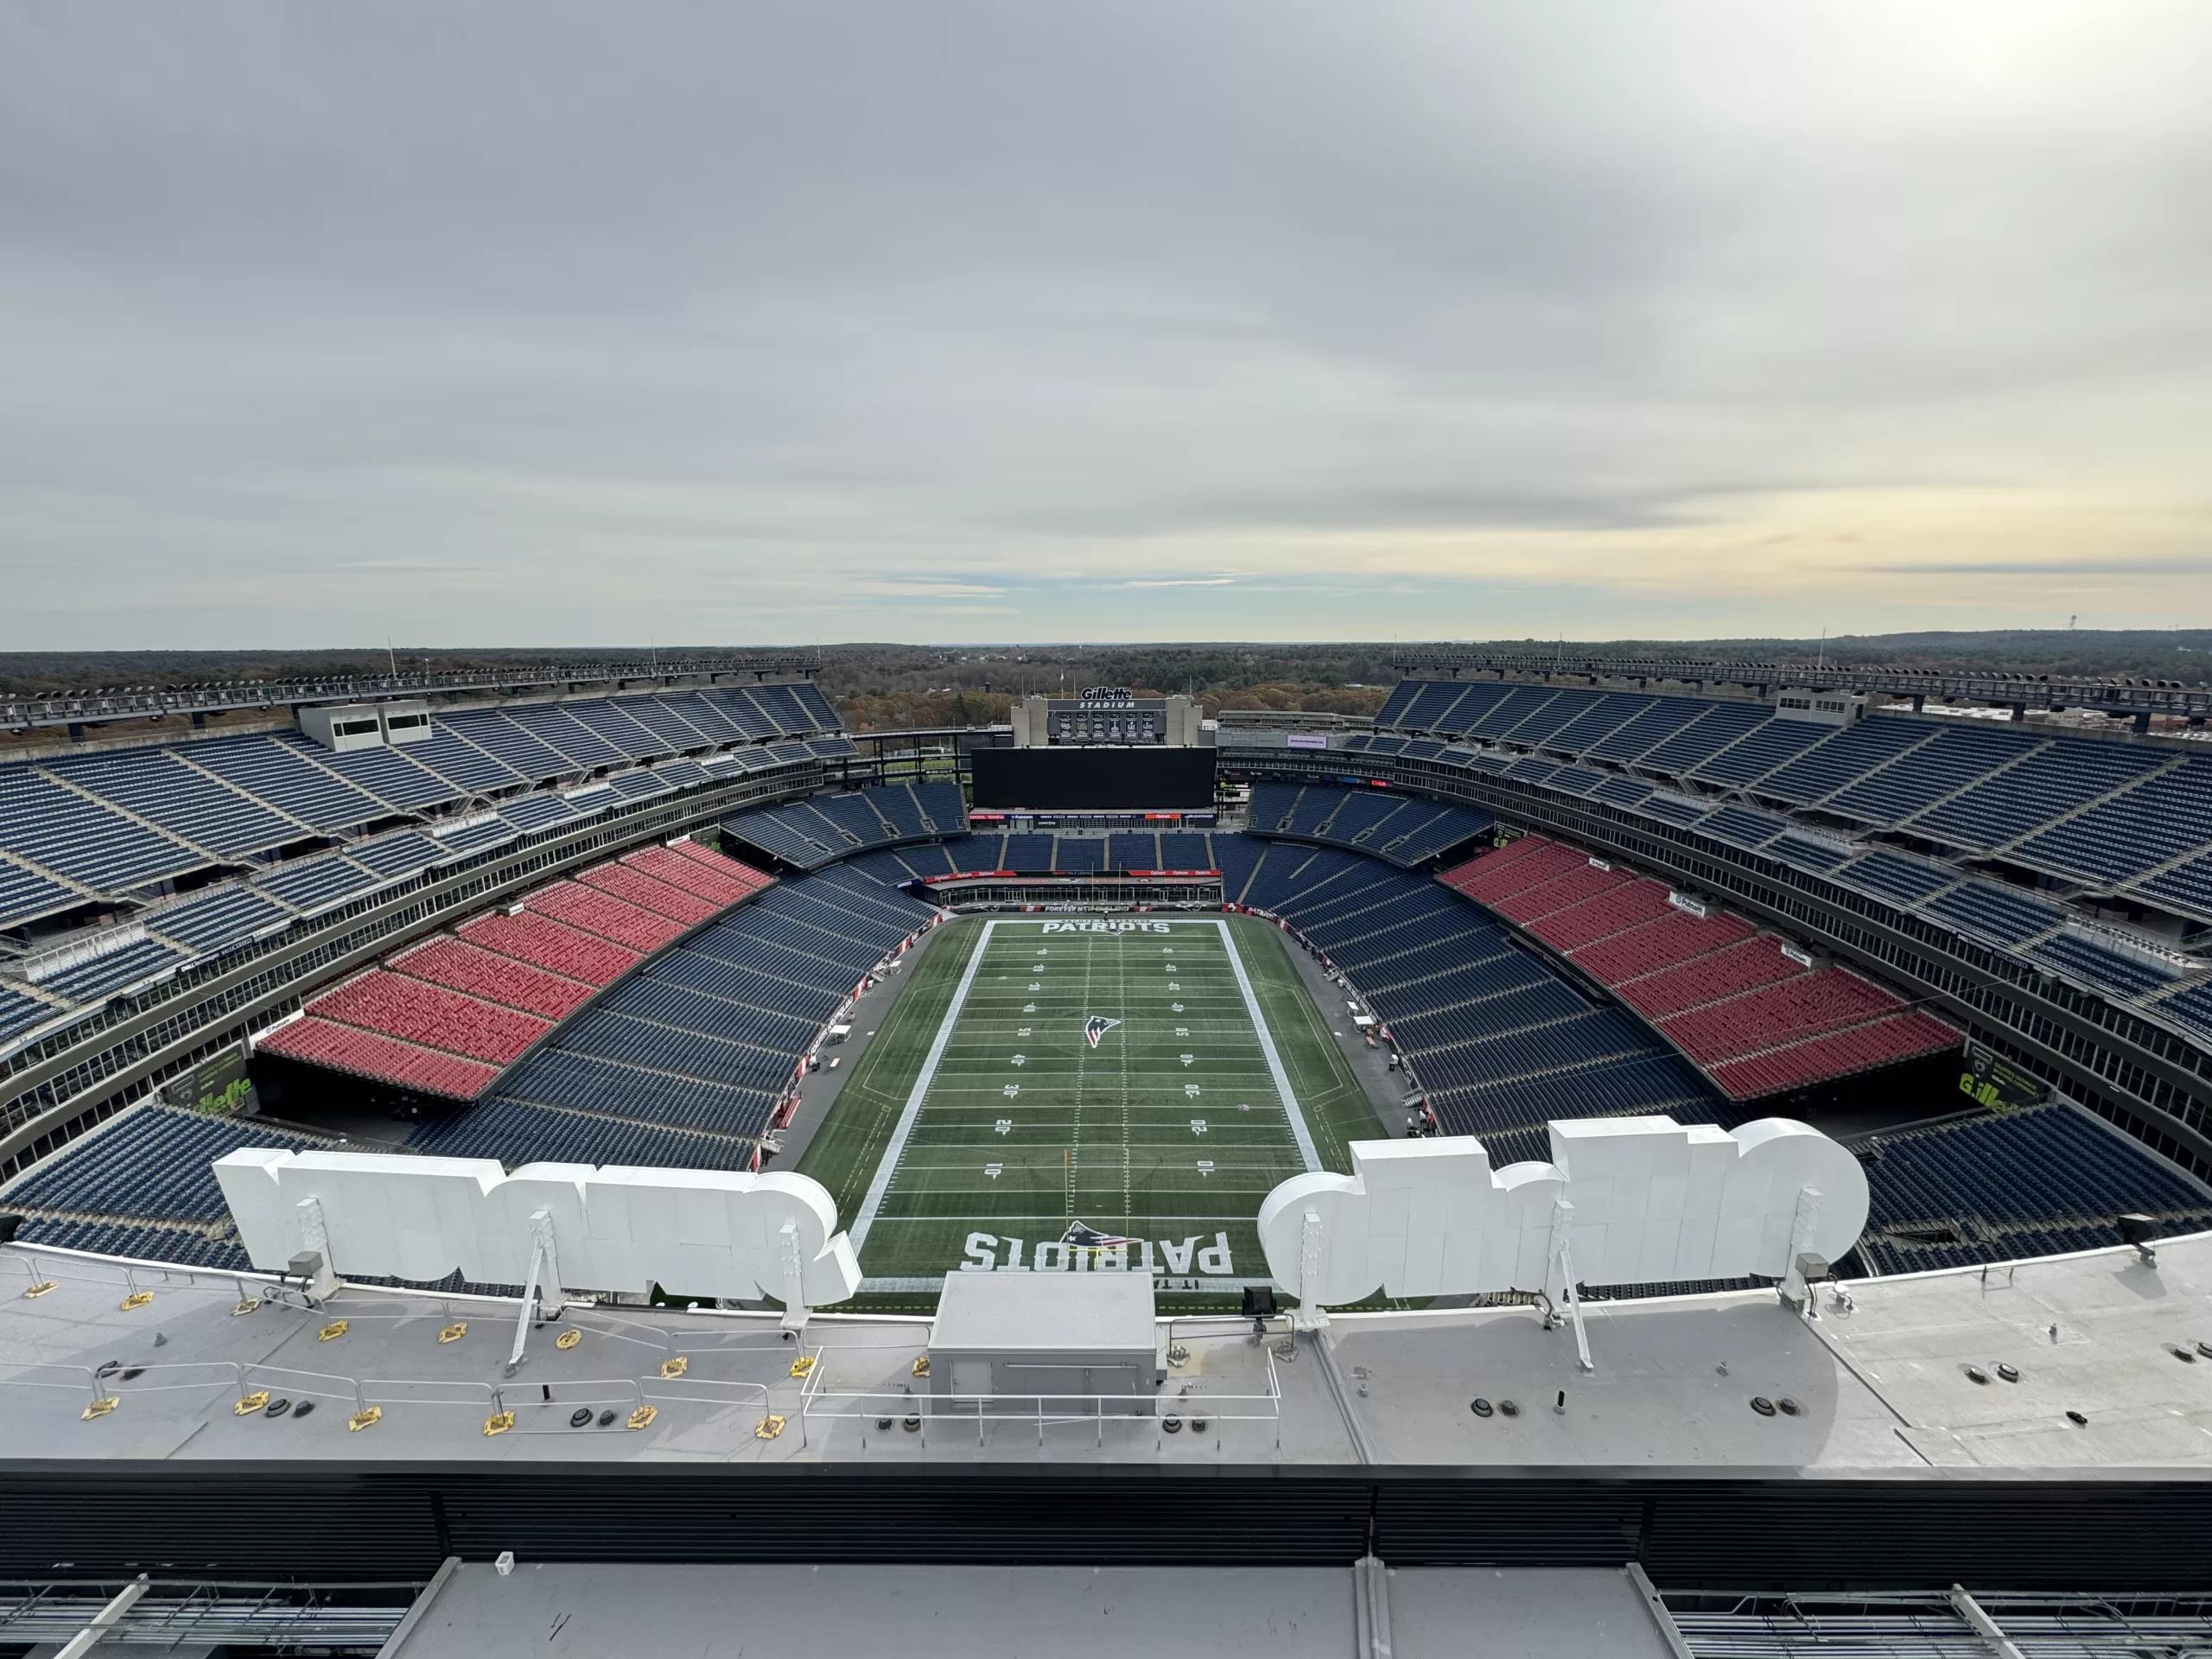 An empty Gillette Stadium in Foxborough, Massachusetts as seen from the top of the observation deck on top of the 218 foot high Lighthouse monument behind the north end zone.